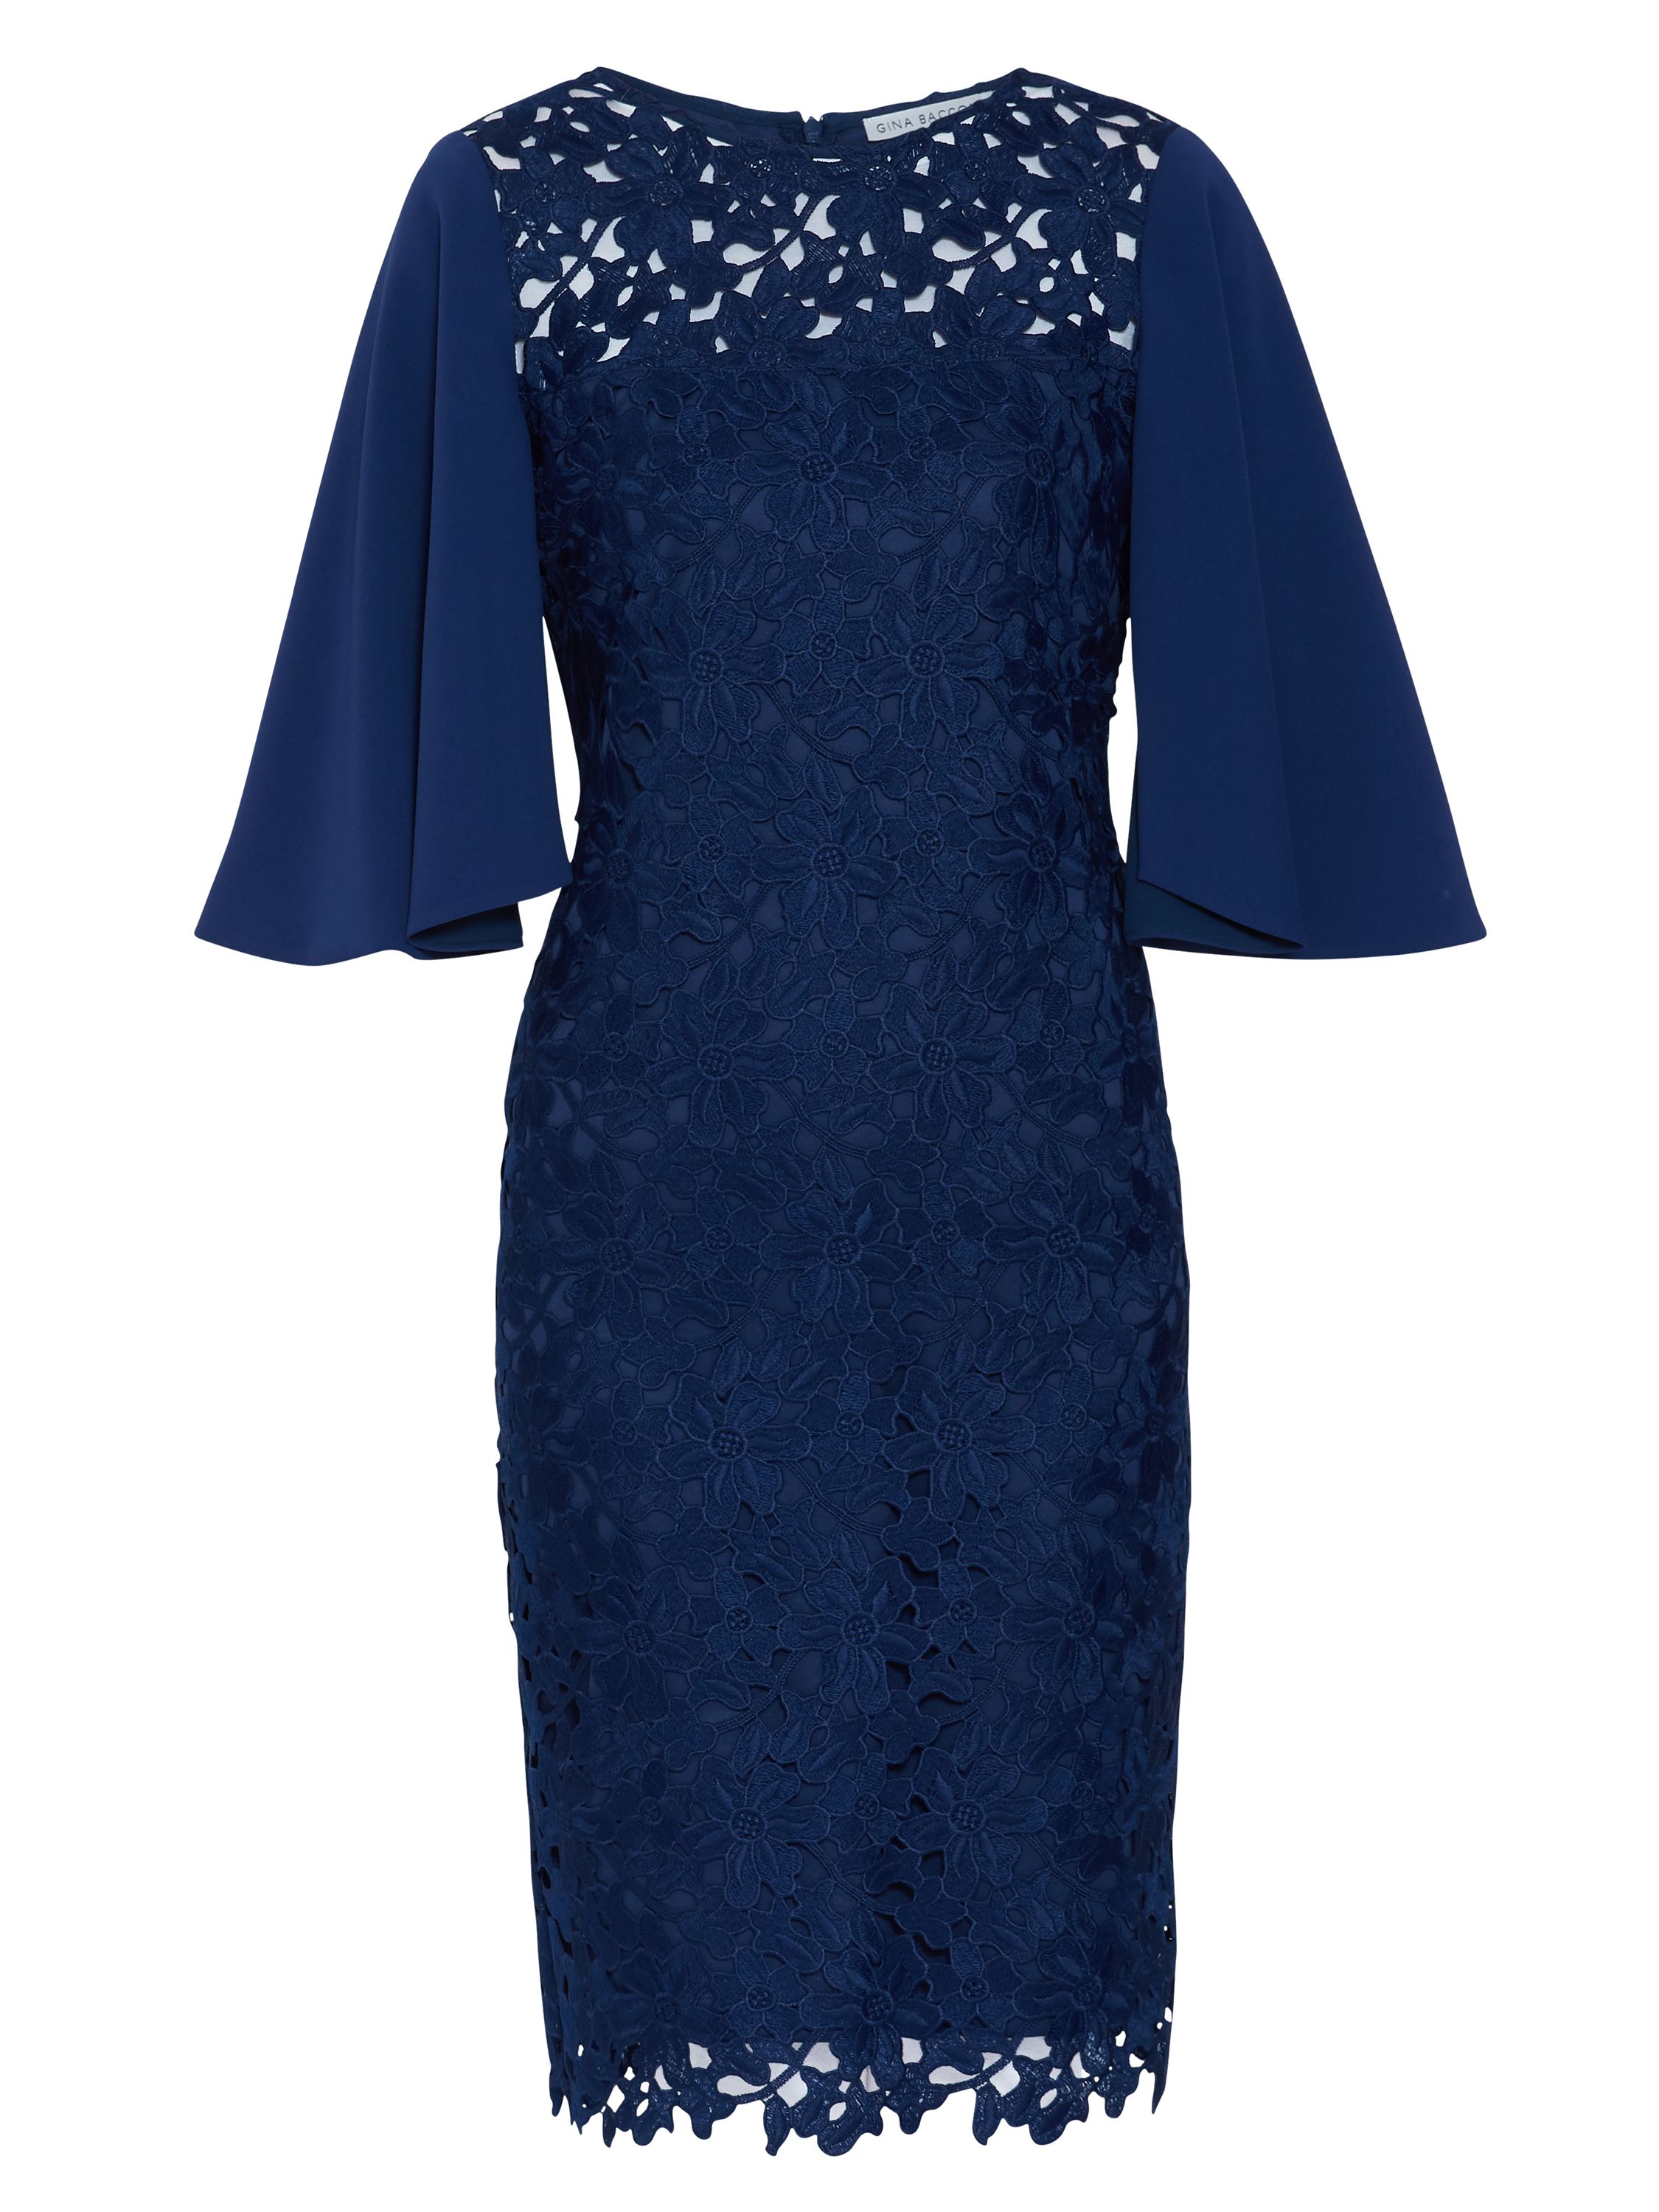 Made of luxurious guipure lace in a beautiful primrose design, this Gina Bacconi frock is simply perfect for the summer season. It is cut to flatter in a shift dress style, with an unlined sheer yoke and a round neckline.Featuring crepe cape sleeves for added class. The dress has a zip opening at the back as well as a hook and eye fastening which creates a keyhole shape feature.